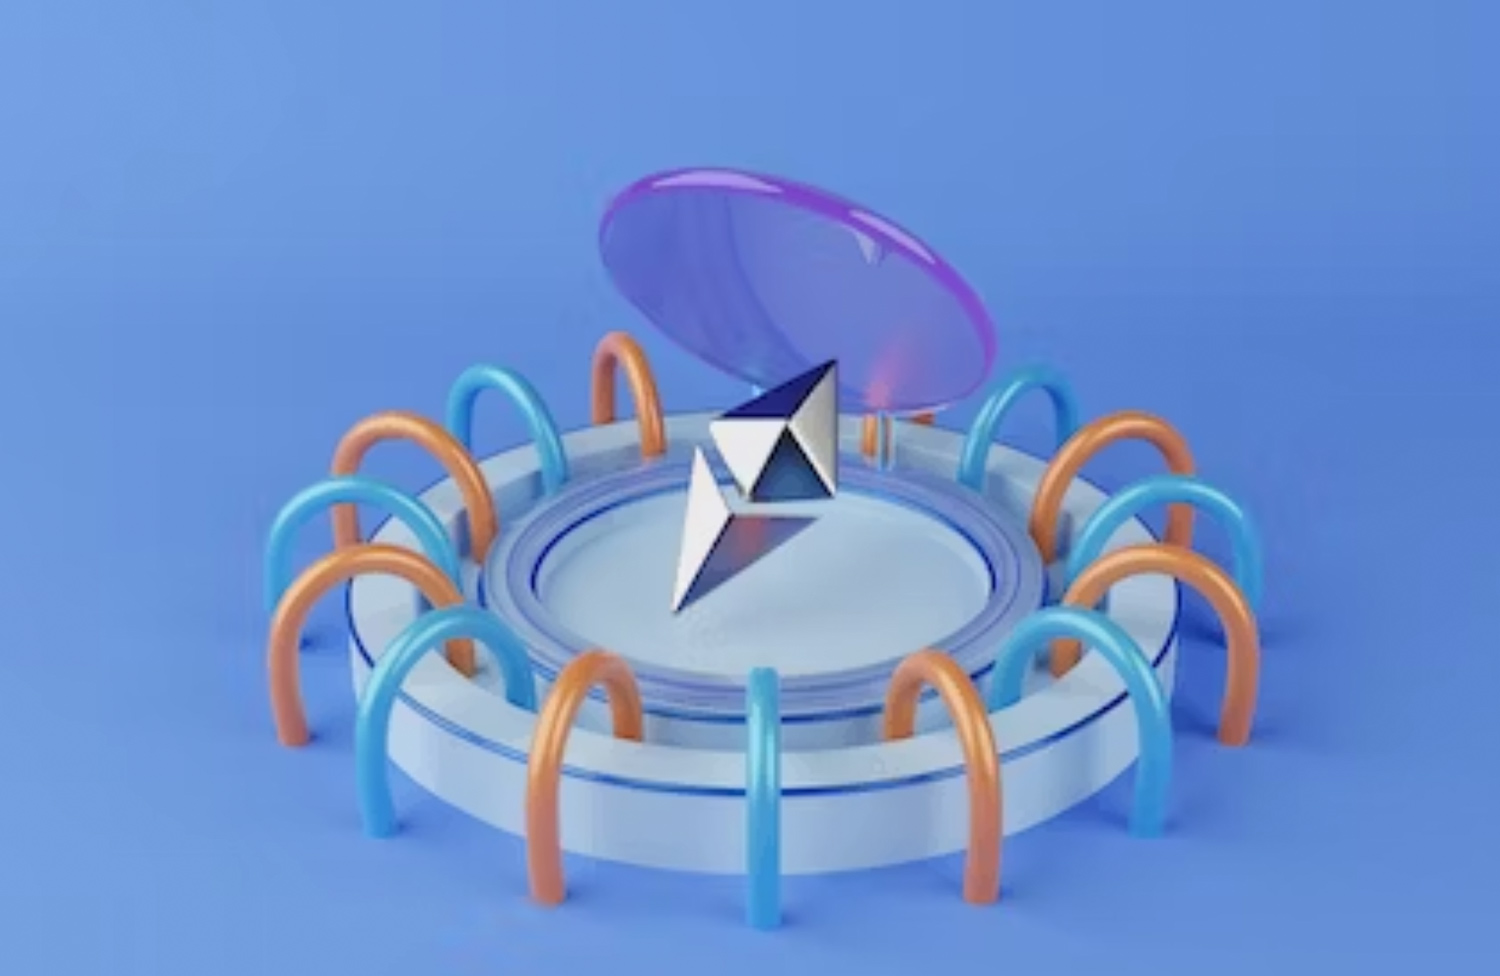 digital art of a circular form with its outer perimeter covered by orange and blue arches, in the center is a metallic like triangular form and abovee the form is a transparent purple disc